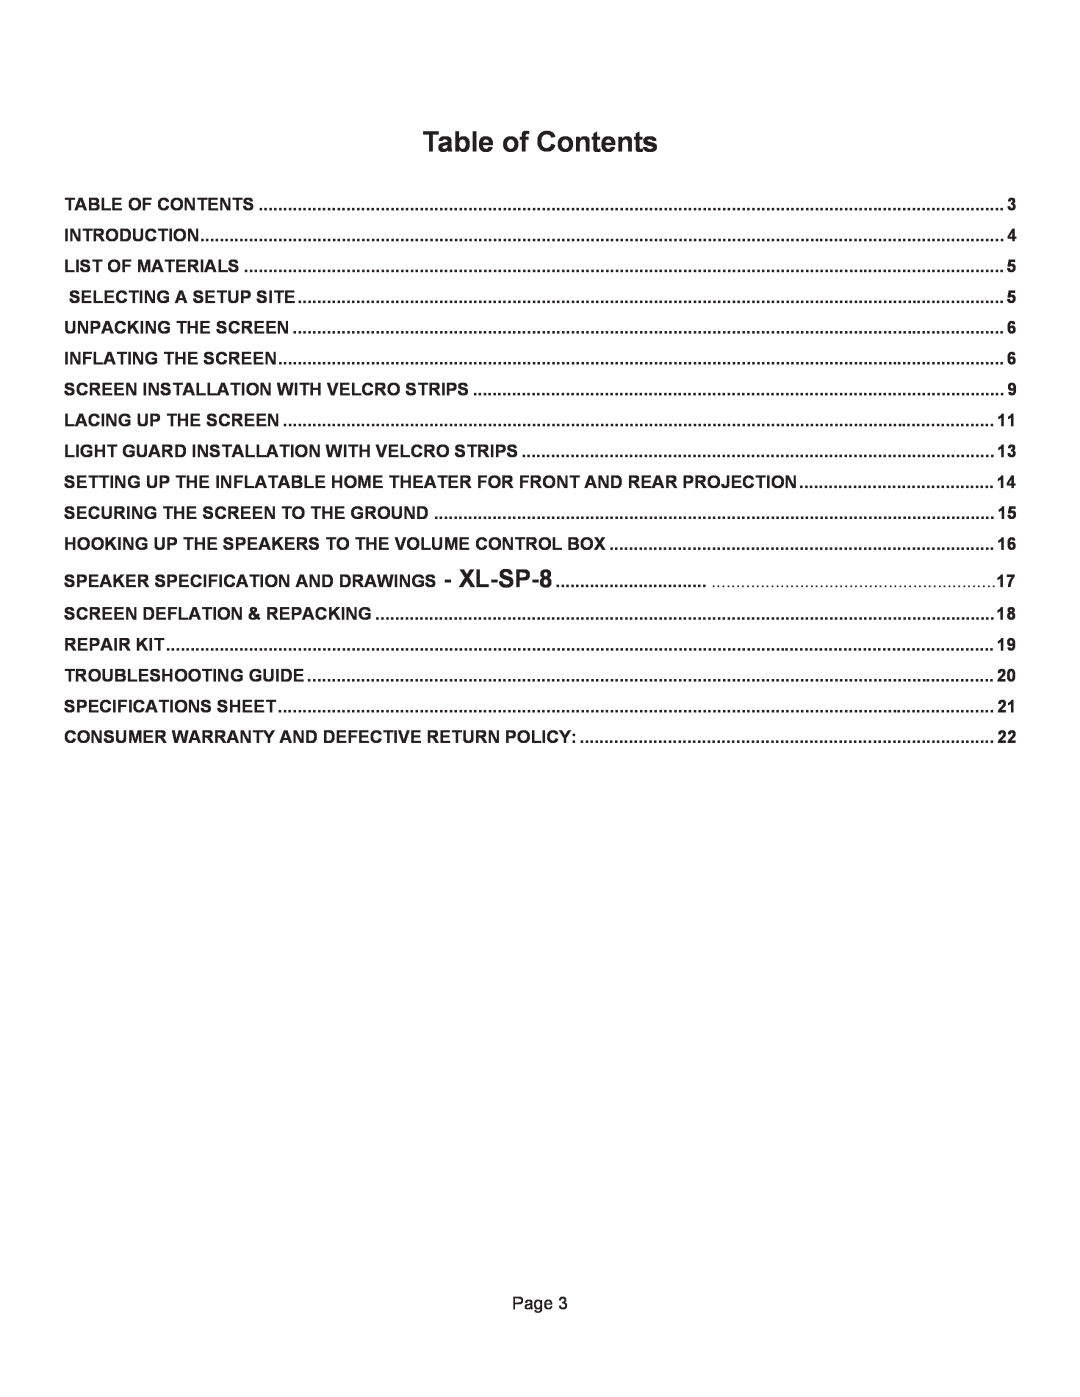 Sima Products XL-8, XL-12 user manual Table of Contents, Page 